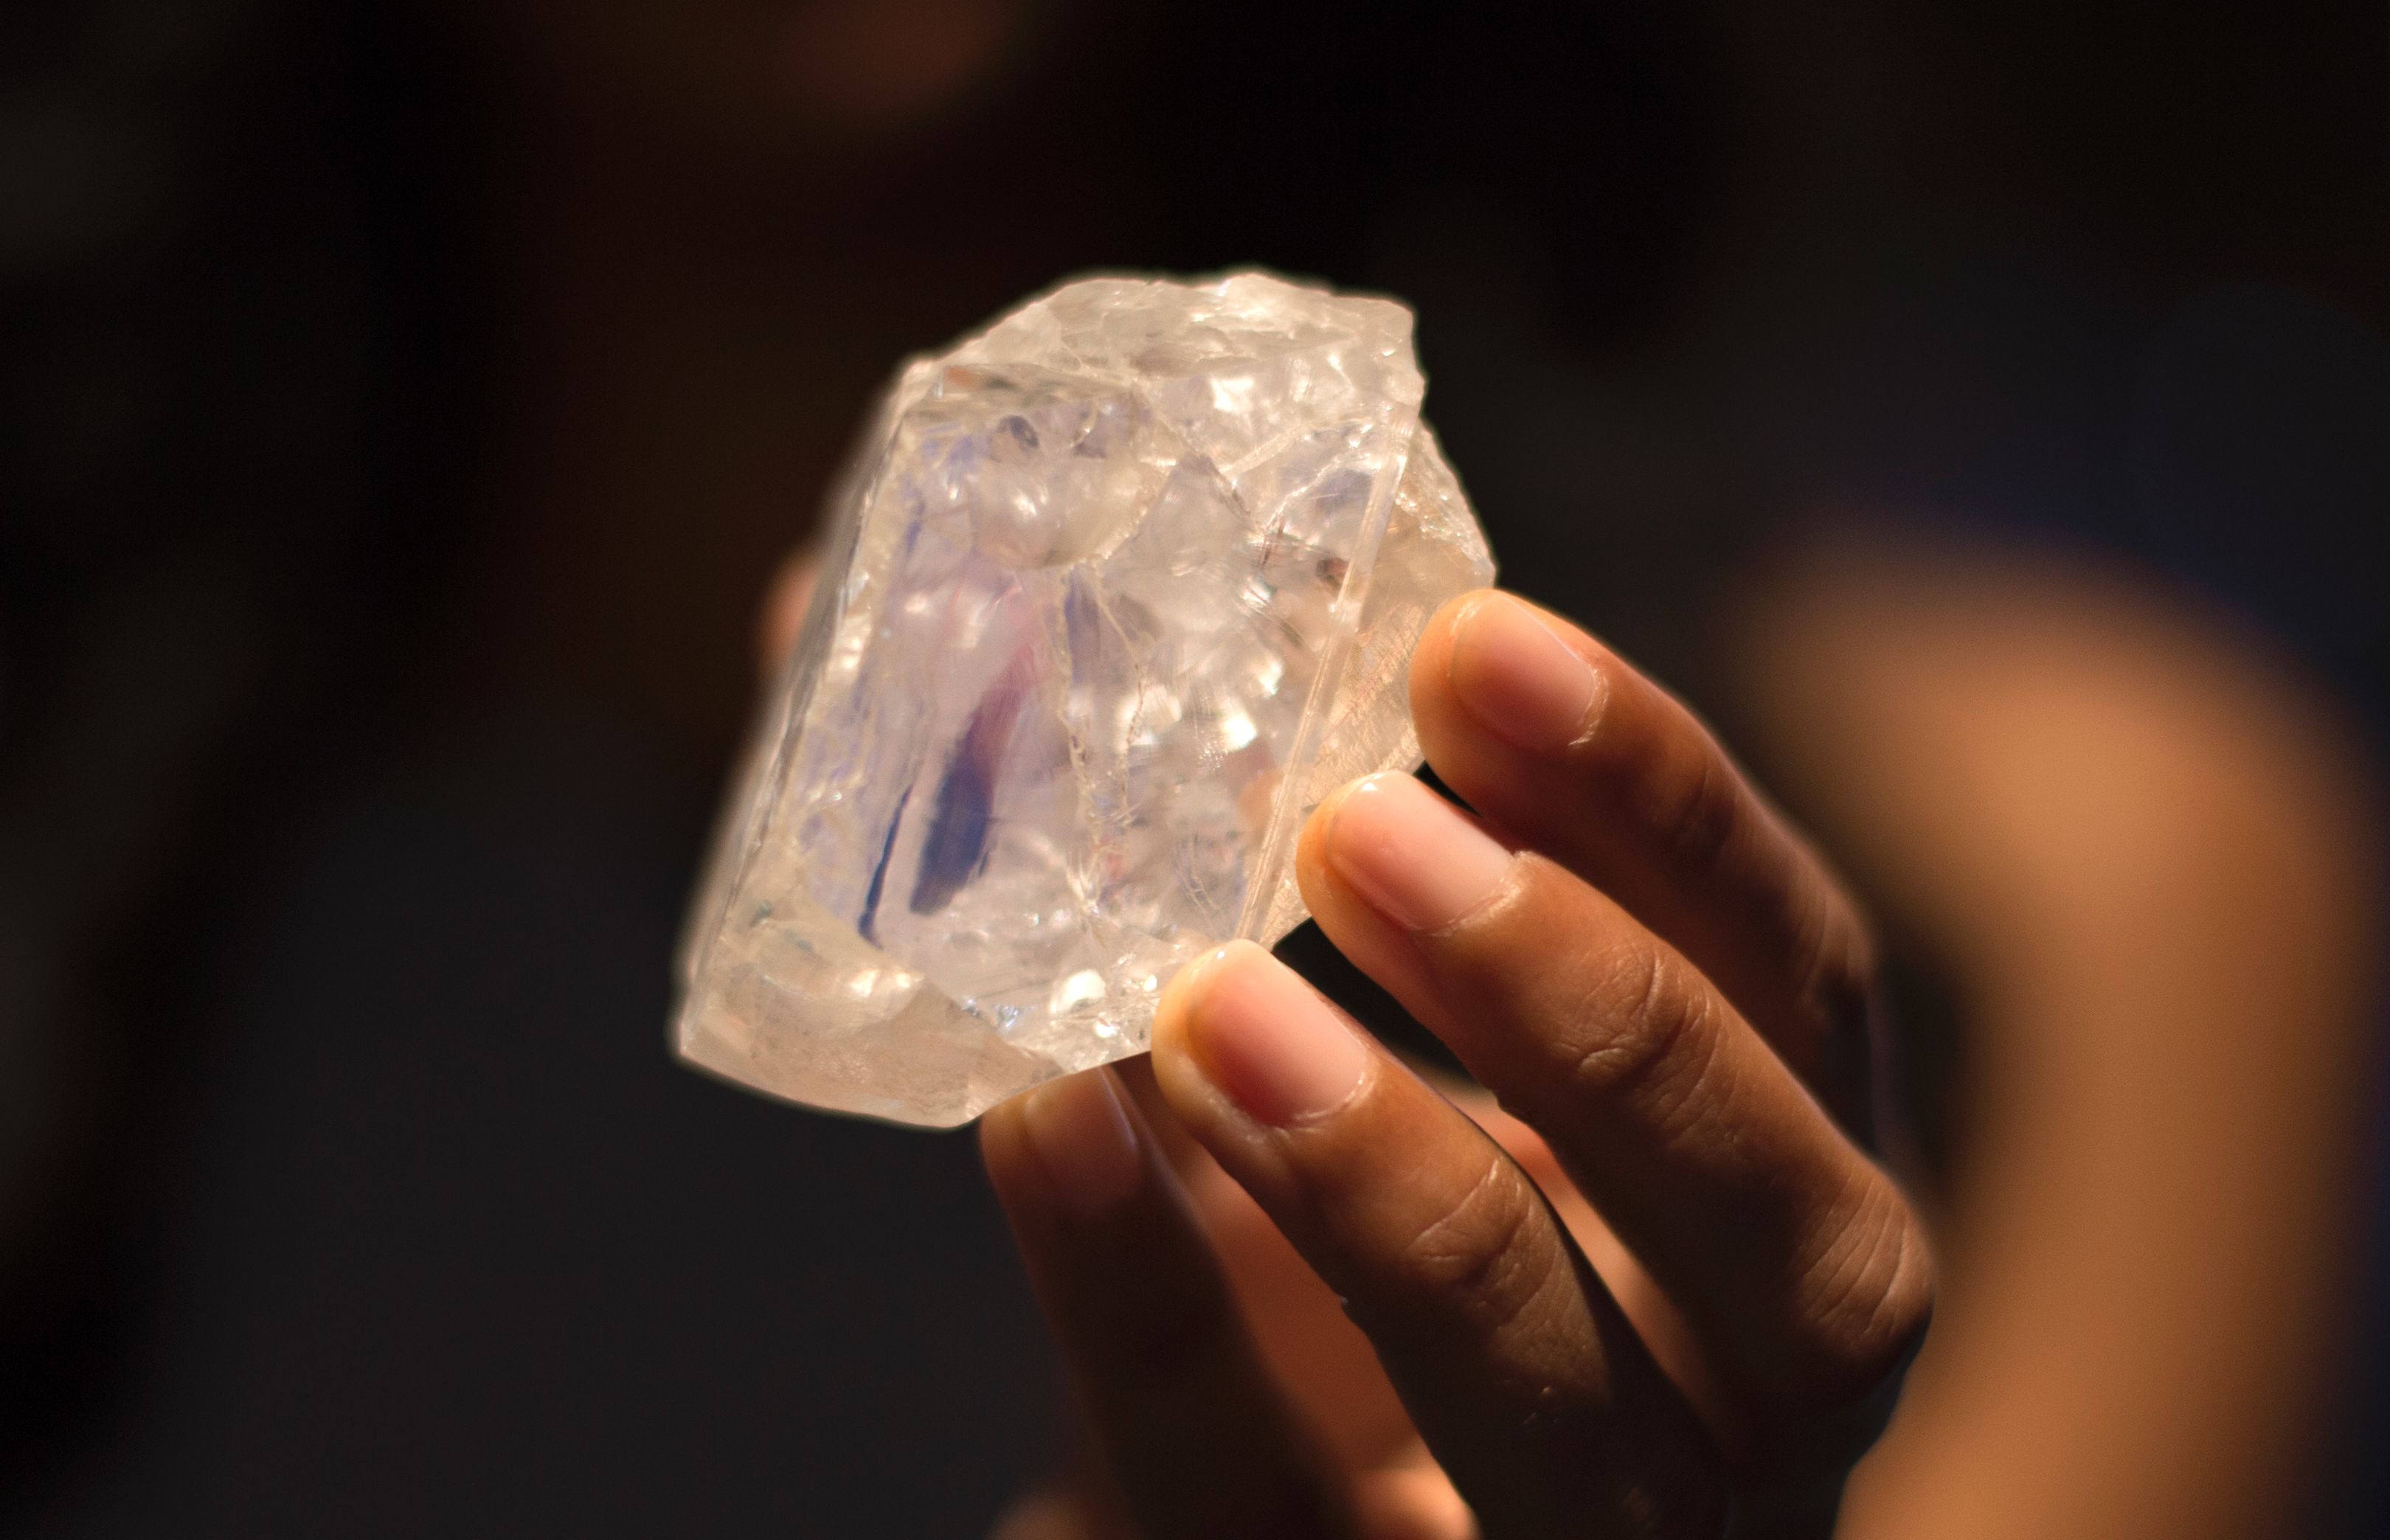 World's biggest diamond to be auctioned in London next month